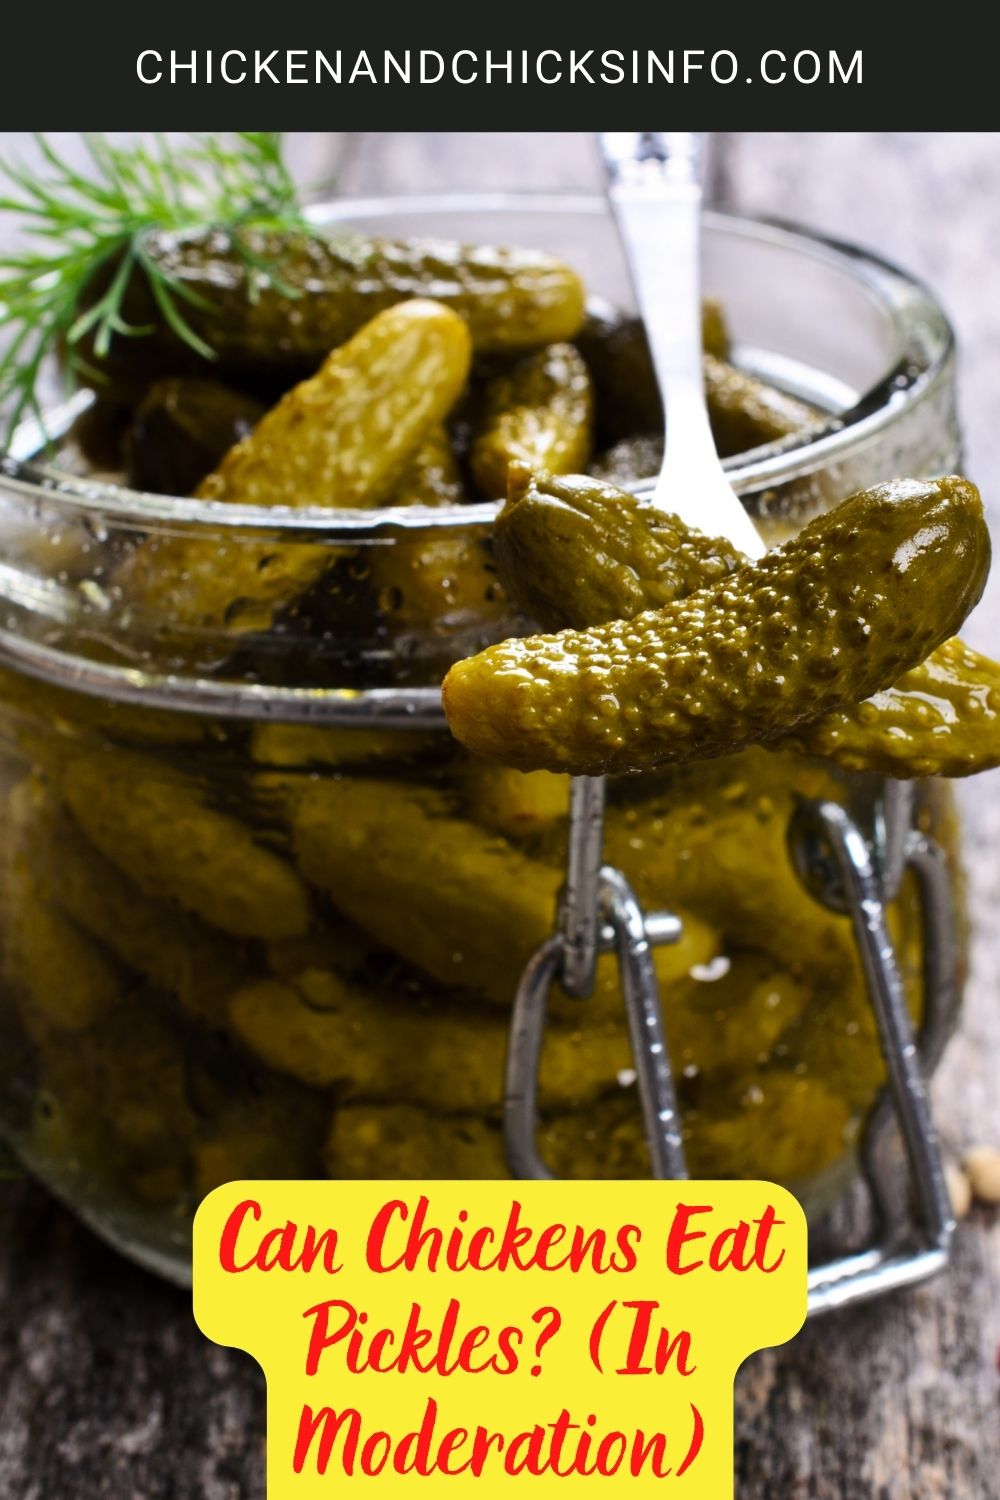 Can Chickens Eat Pickles? (In Moderation) poster.
